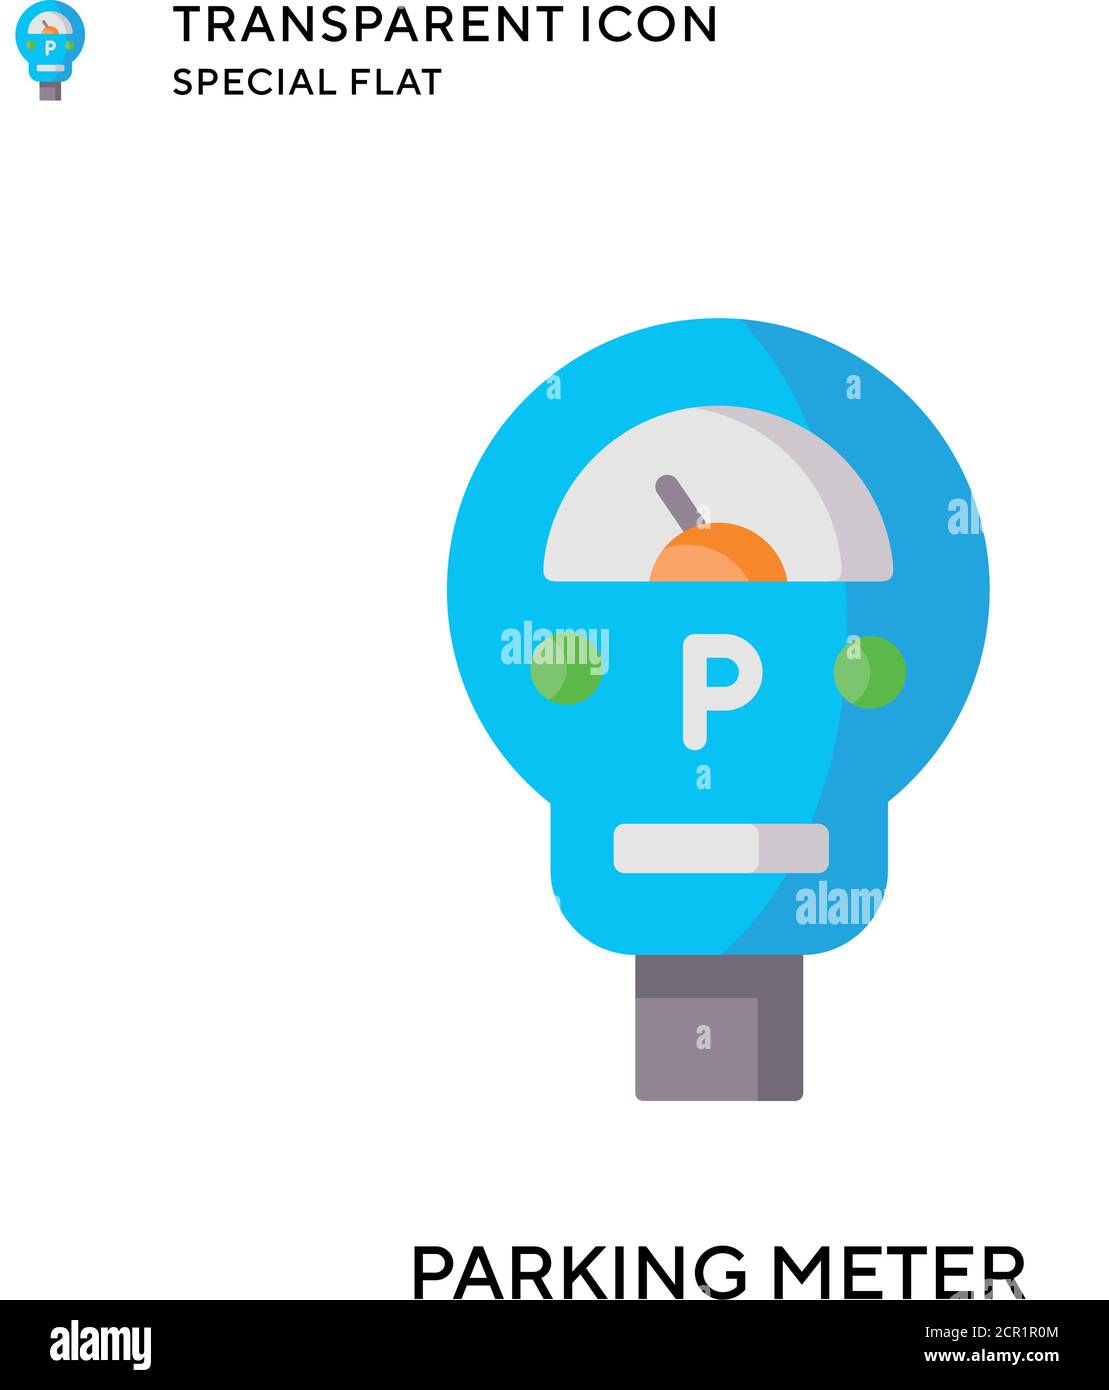 Parking meter vector icon. Flat style illustration. EPS 10 vector. Stock Vector